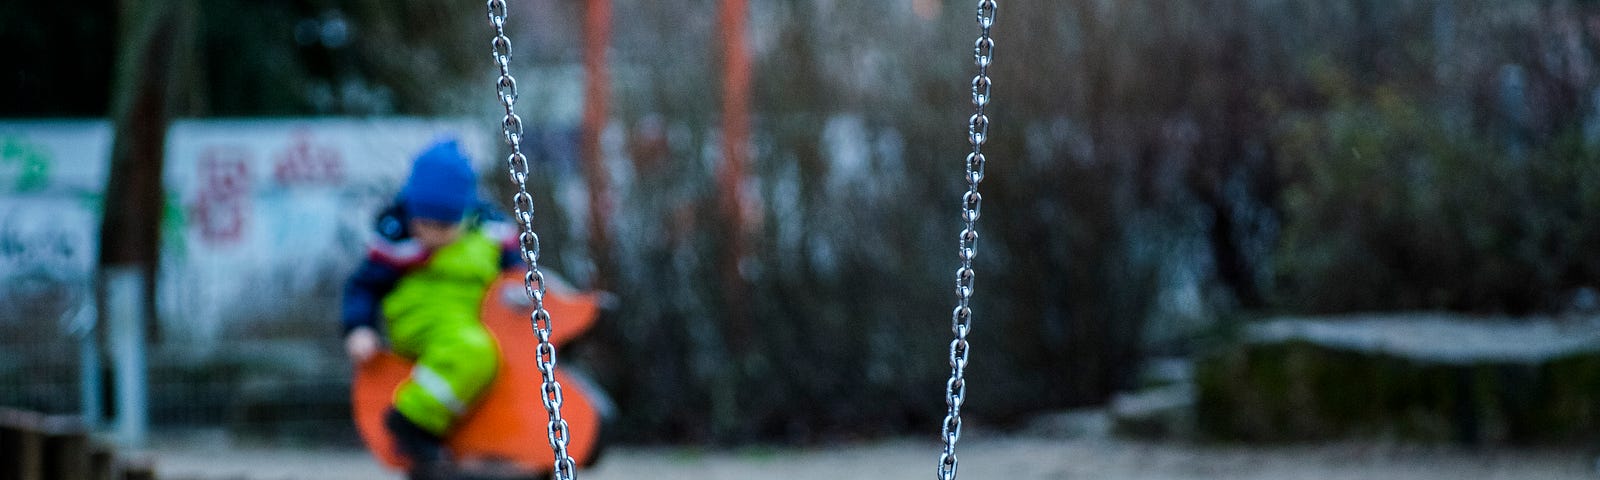 An empty swing on a playground